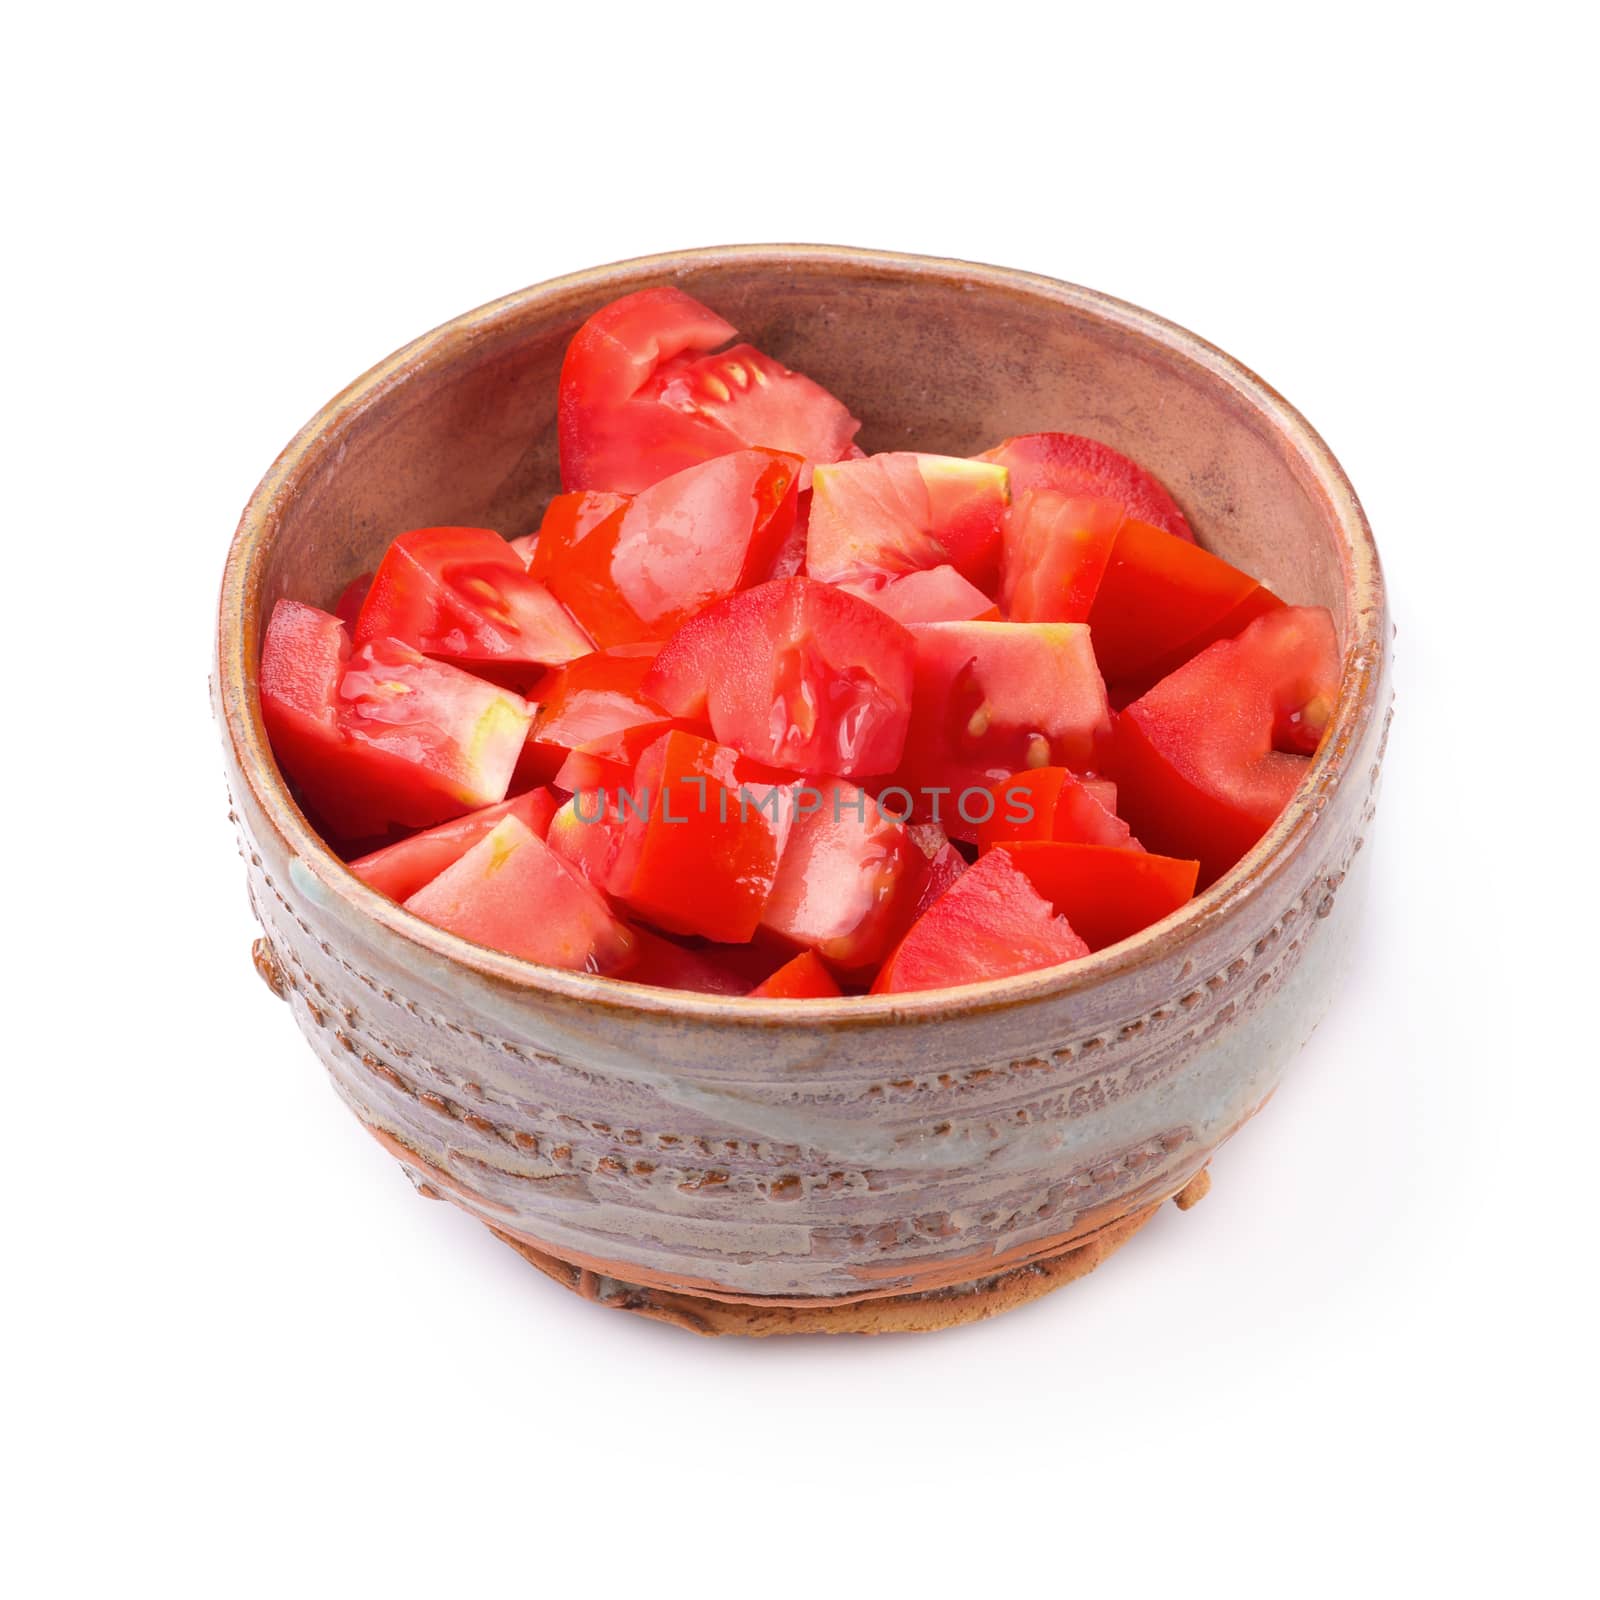 Chopped tomatoes in a bowl isolated on a white background by kaiskynet